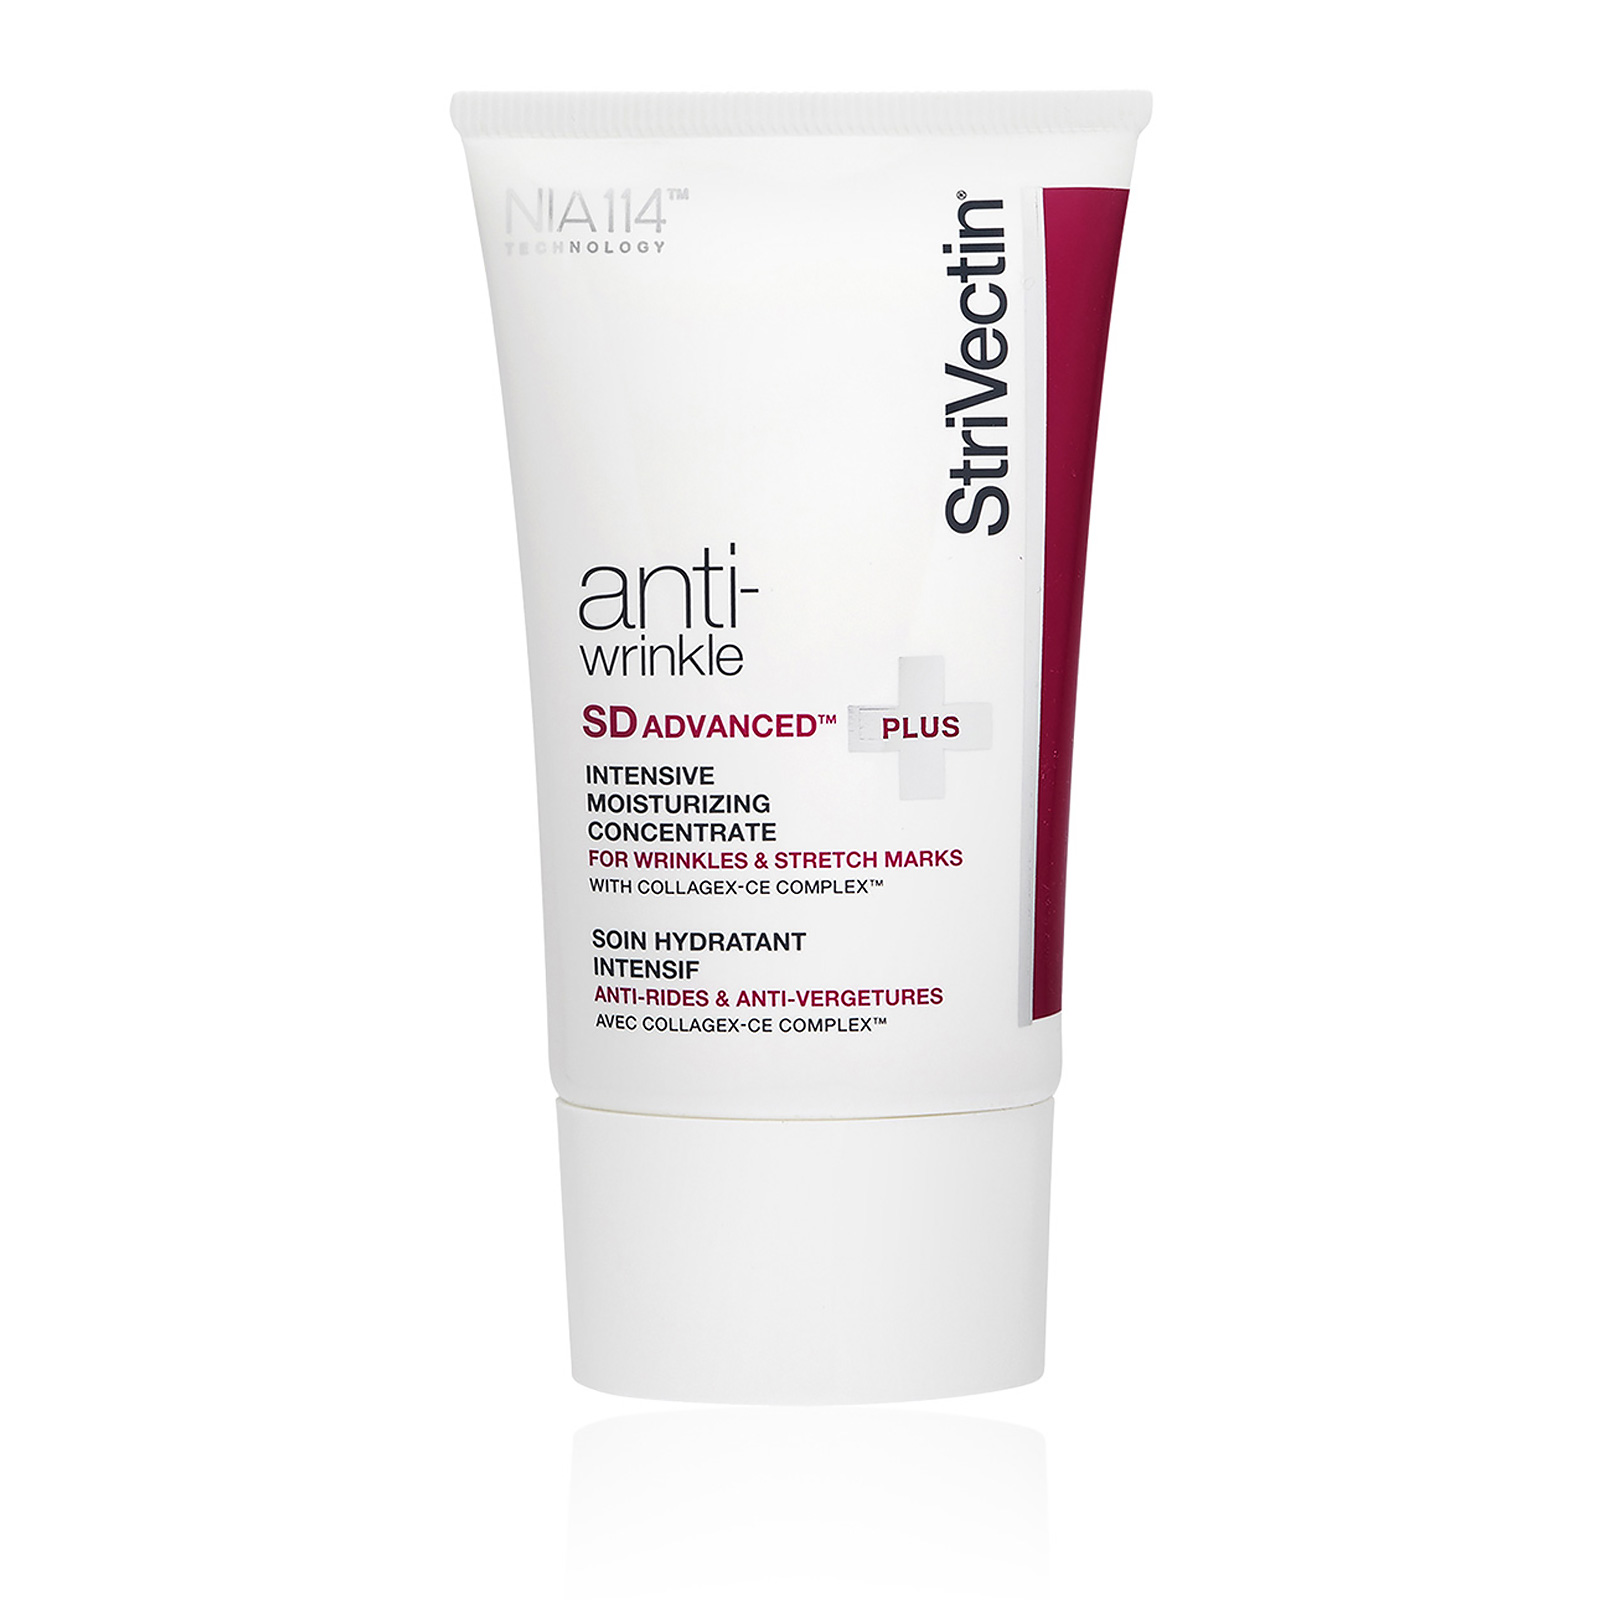 Anti-Wrinkle SD Advanced Intensive Concentrate for Wrinkles & Stretch Marks